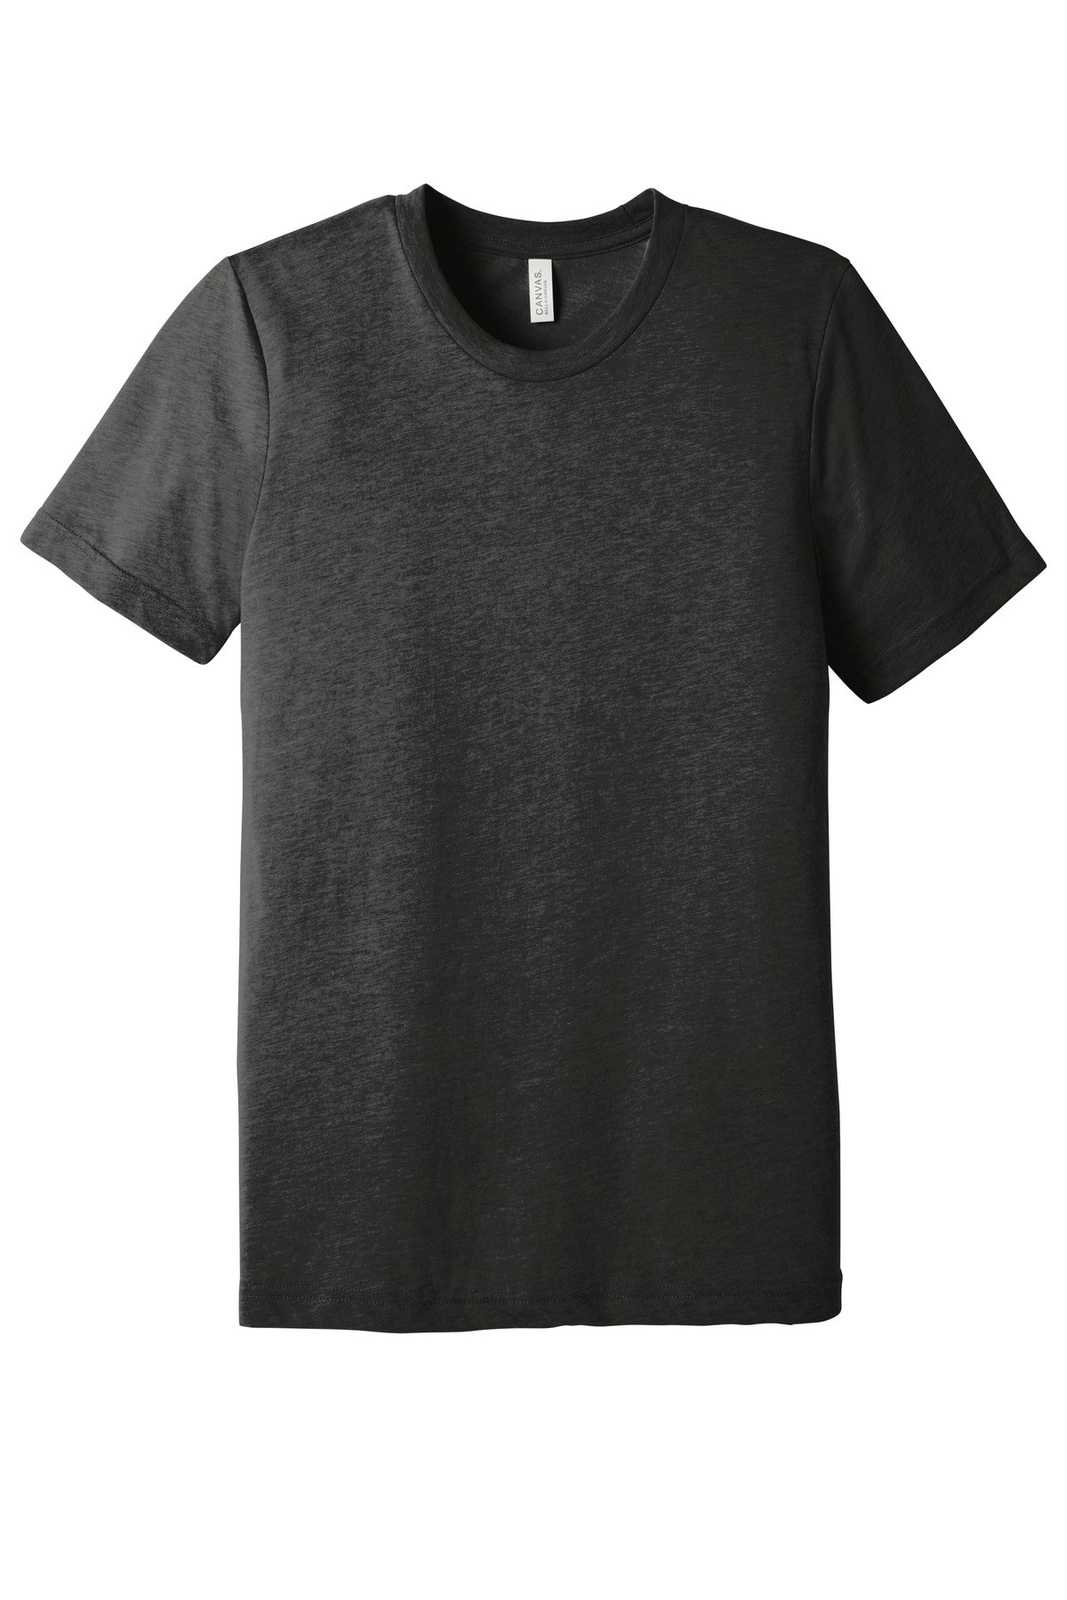 Bella + Canvas 3413 Unisex Triblend Short Sleeve Tee - Charcoal-Black Triblend - HIT a Double